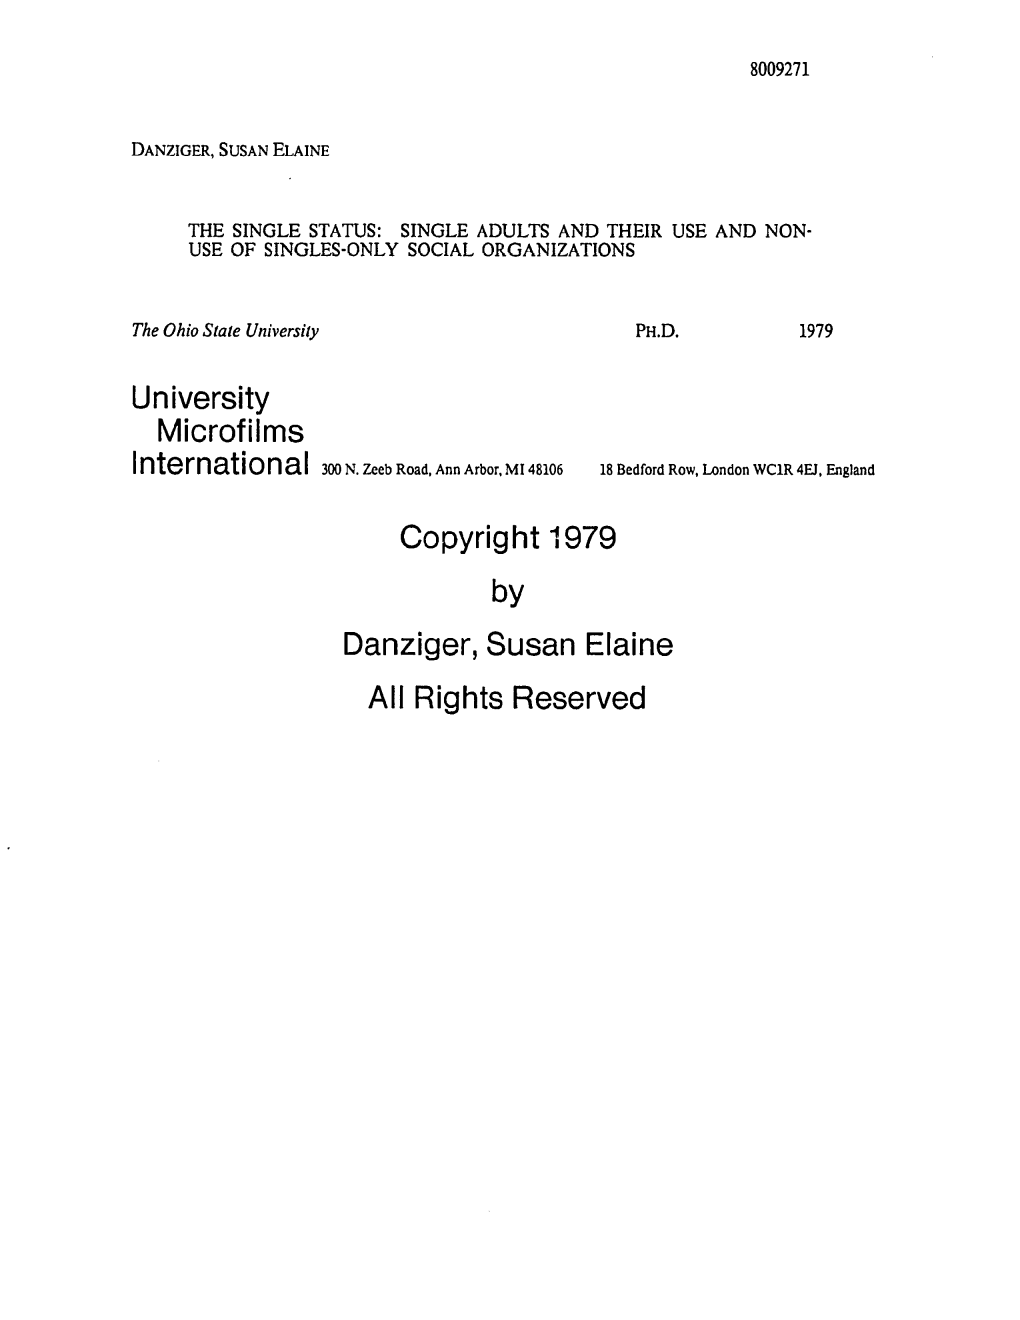 University Microfilms Copyright 1979 by Danziger, Susan Elaine All